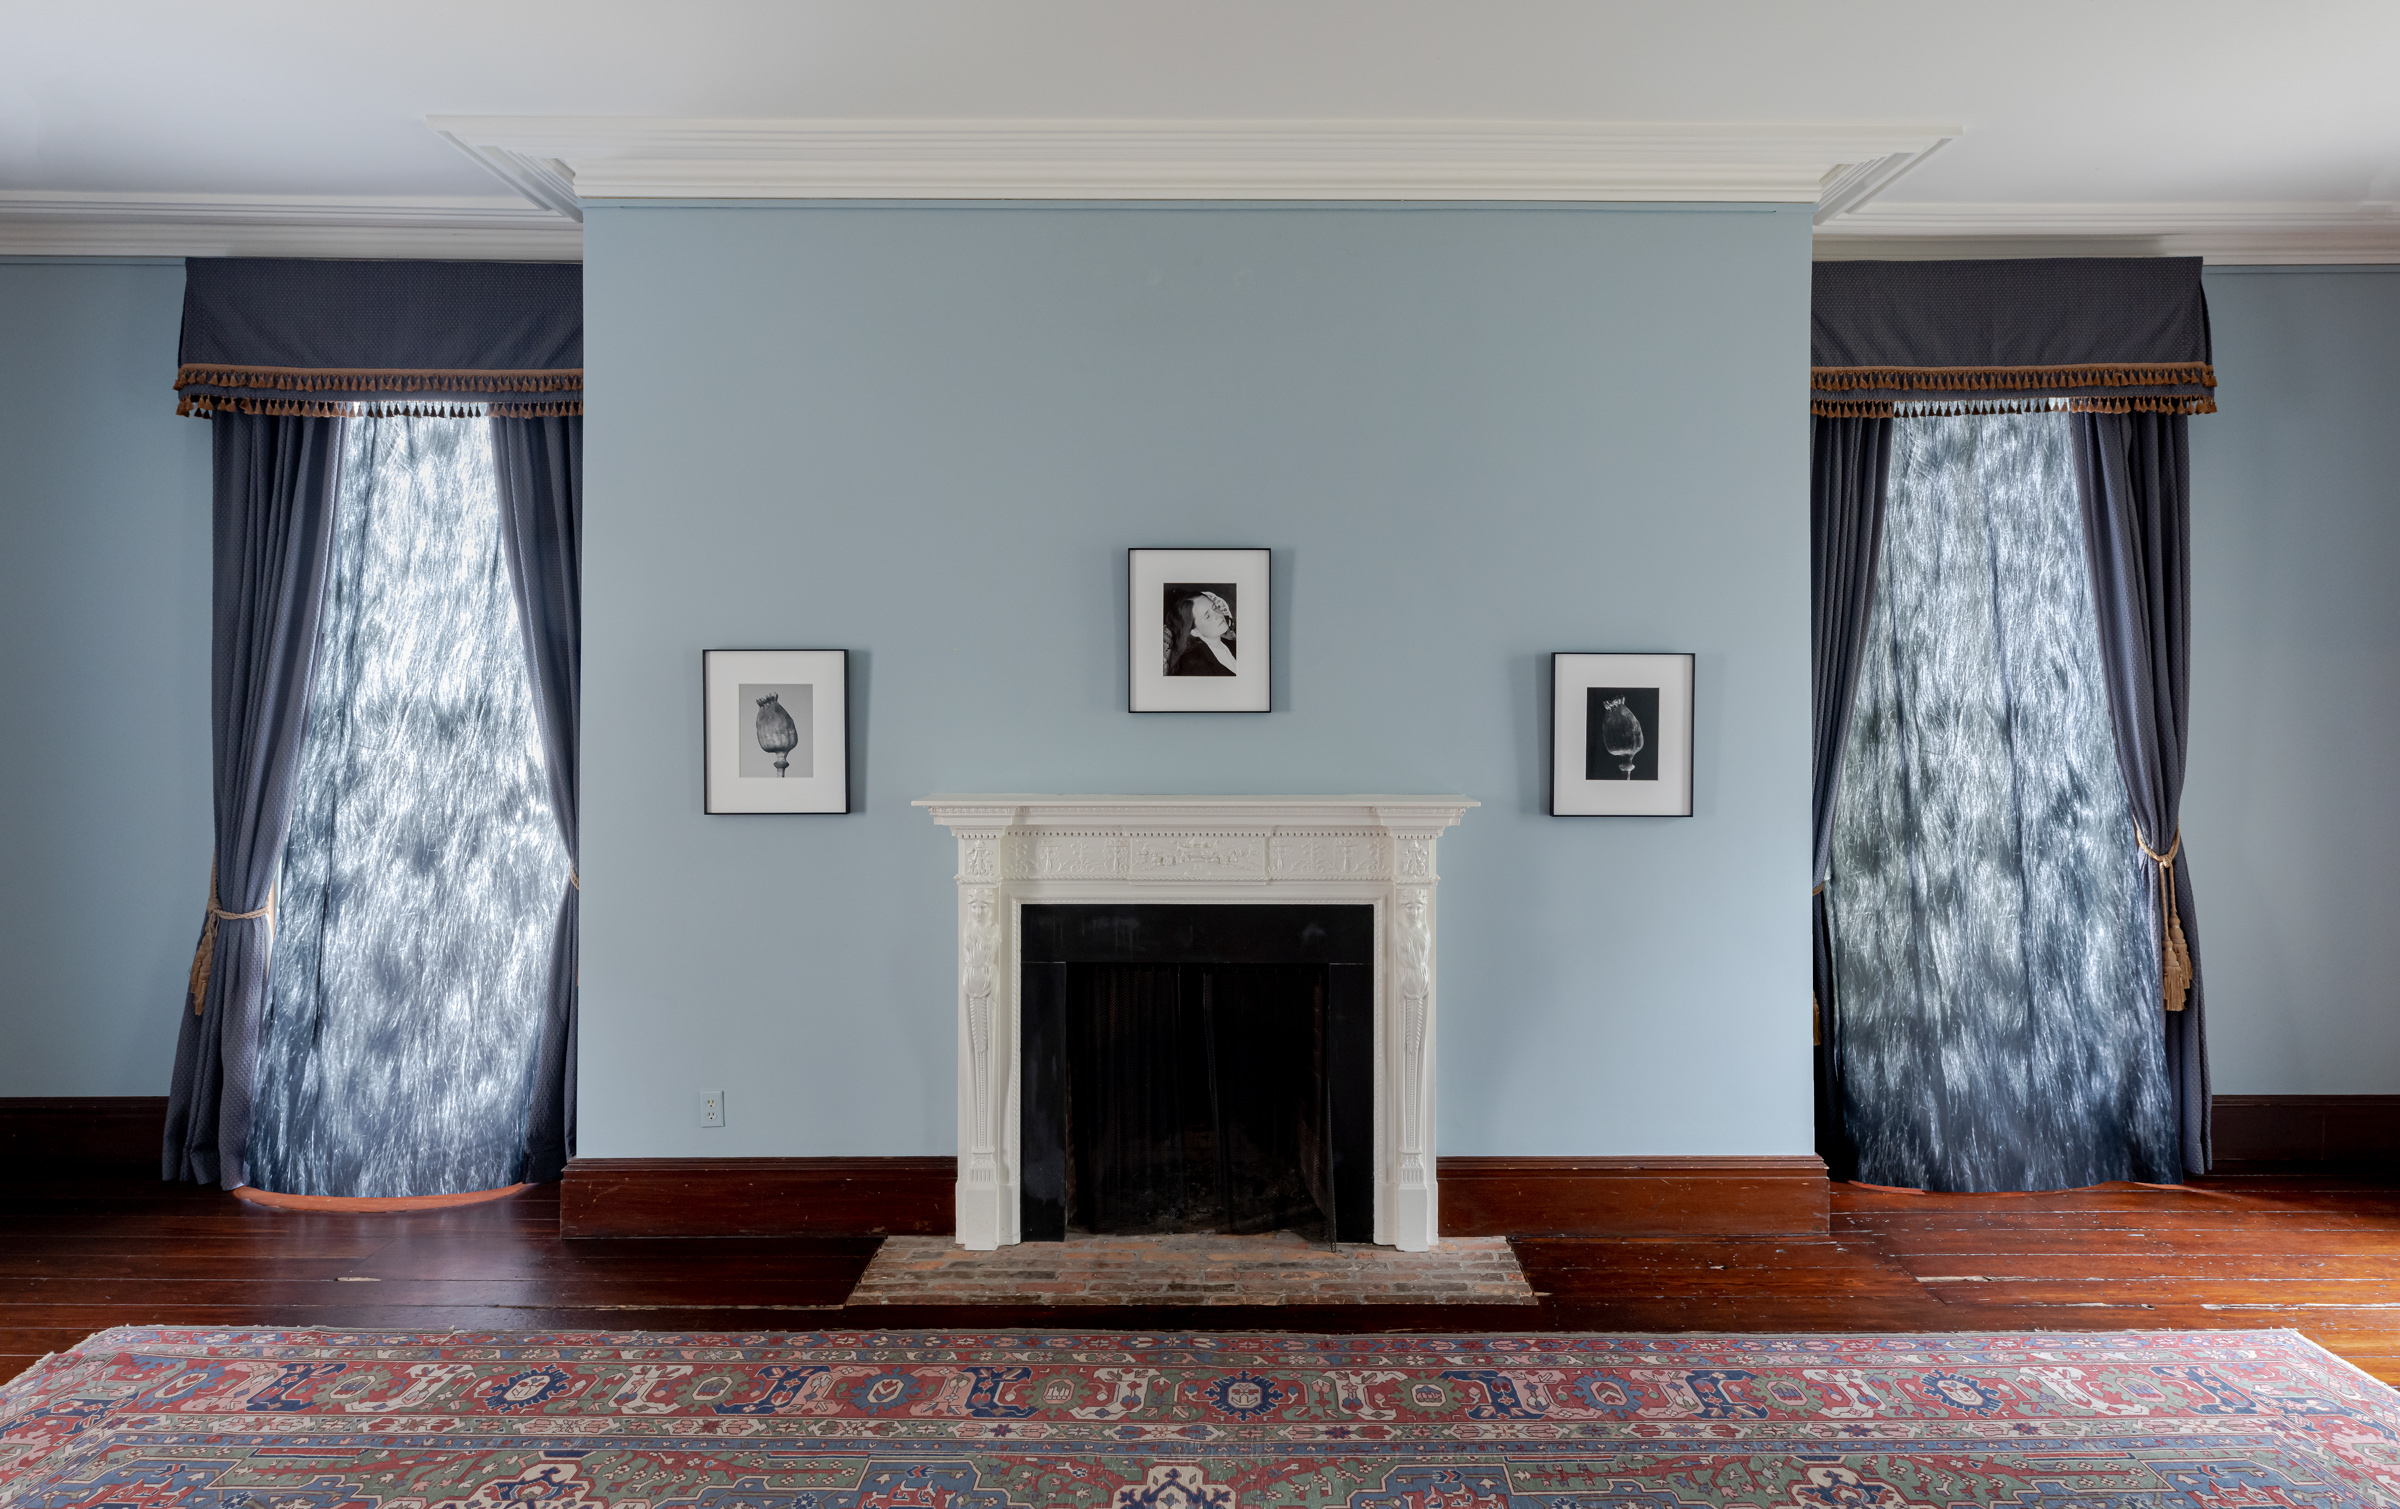     Tereza Zelenkova, The Double Room, installation view, Campbell House Museum, Toronto, 2021. Courtesy of the artist and CONTACT. Photo: Toni Hafkenscheid

